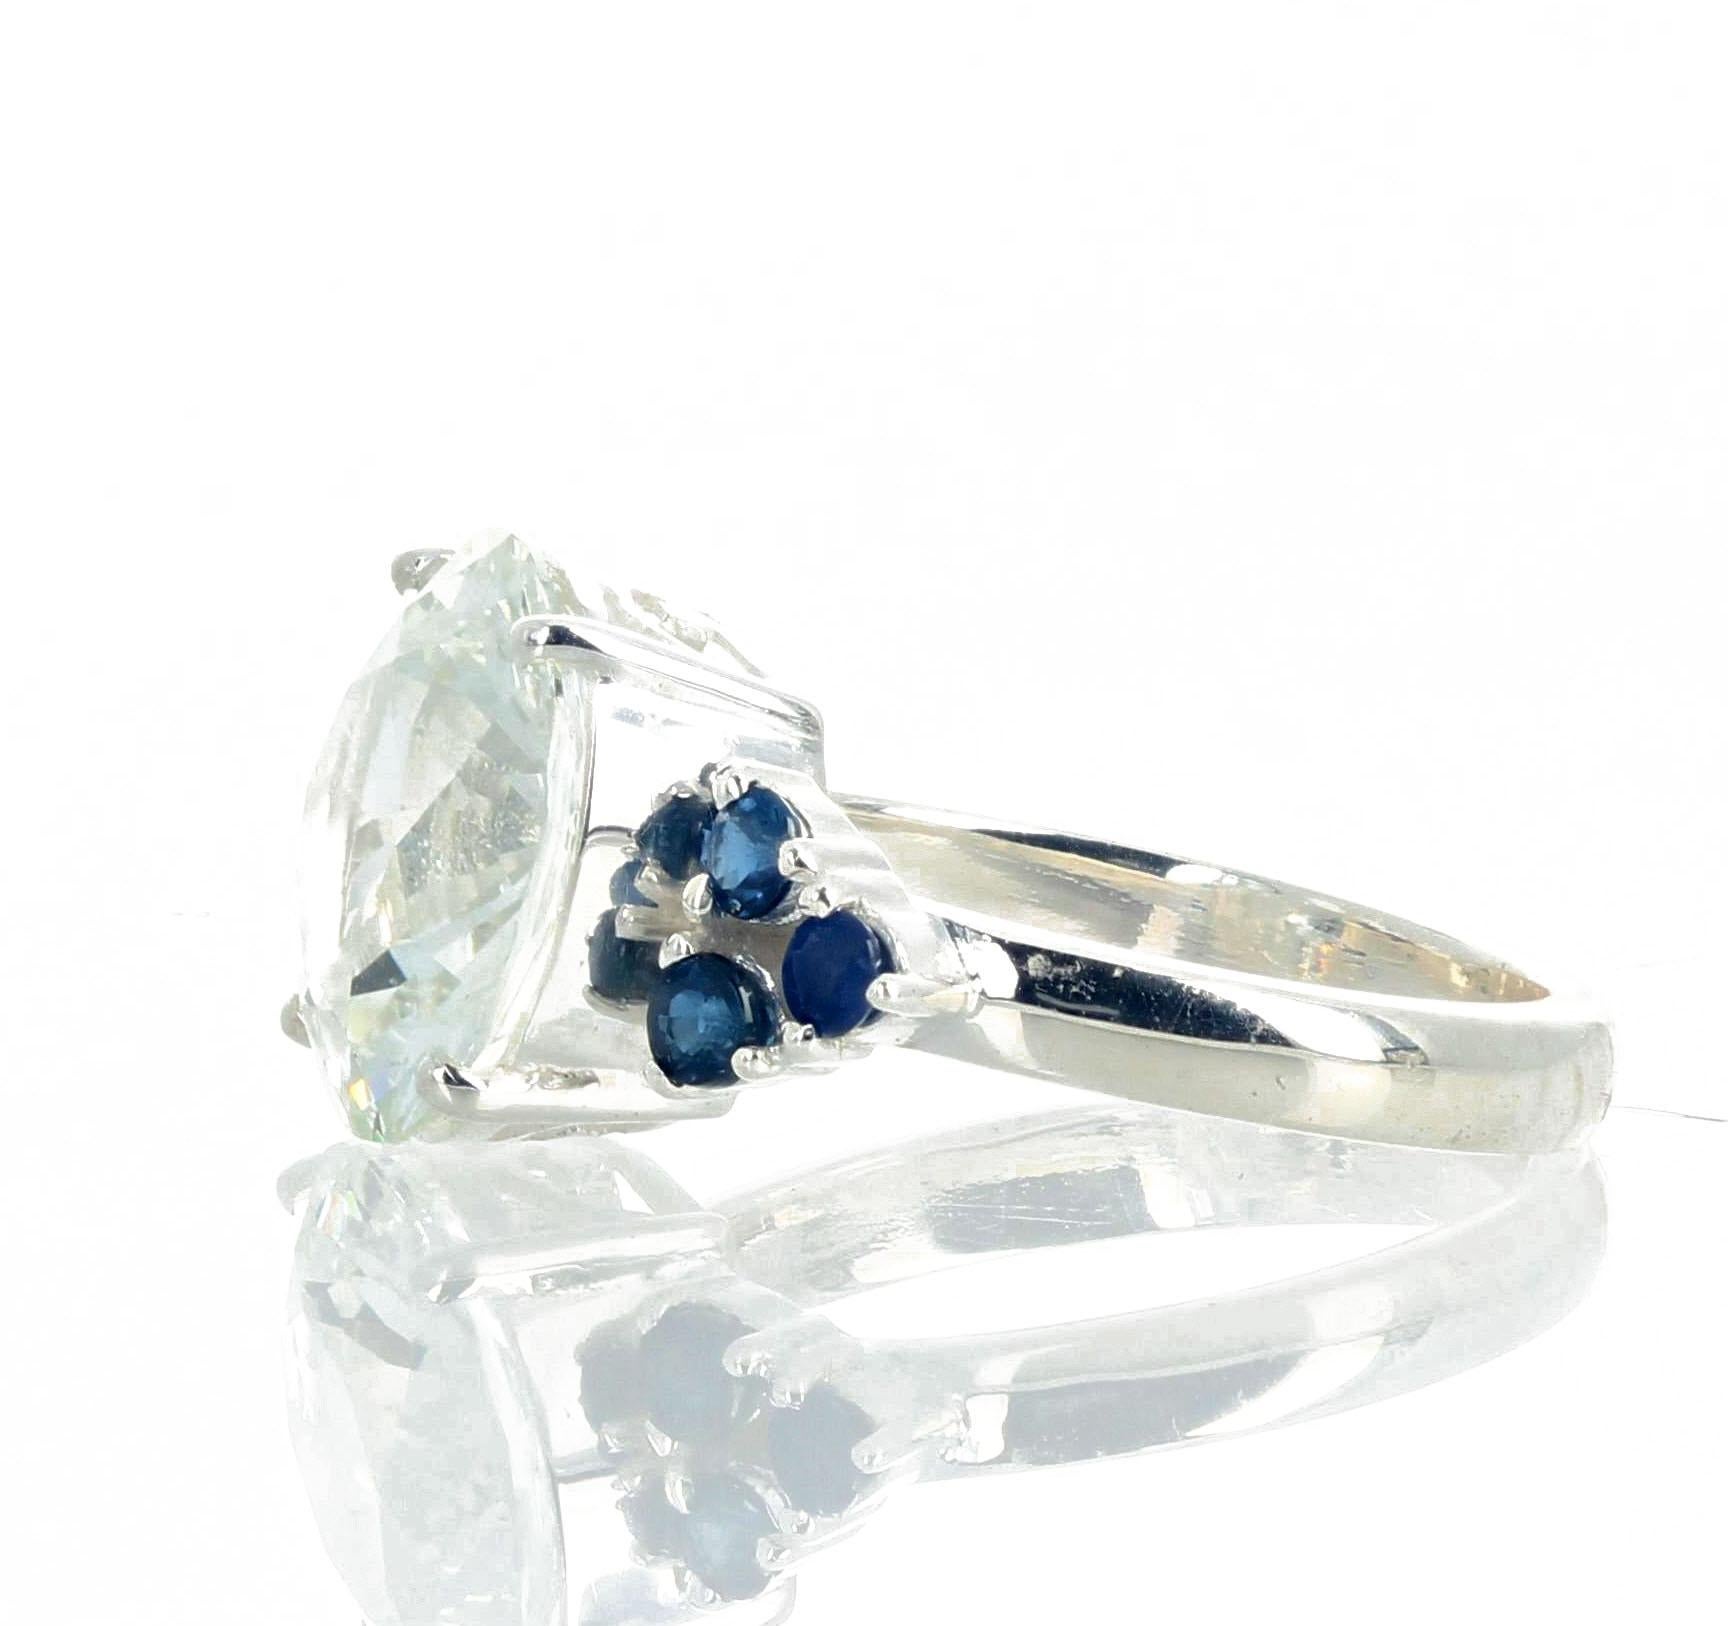 AJD Glittering 6.52 Carat Natural Fiery White Zircon & Blue Sapphires Ring For Sale 1